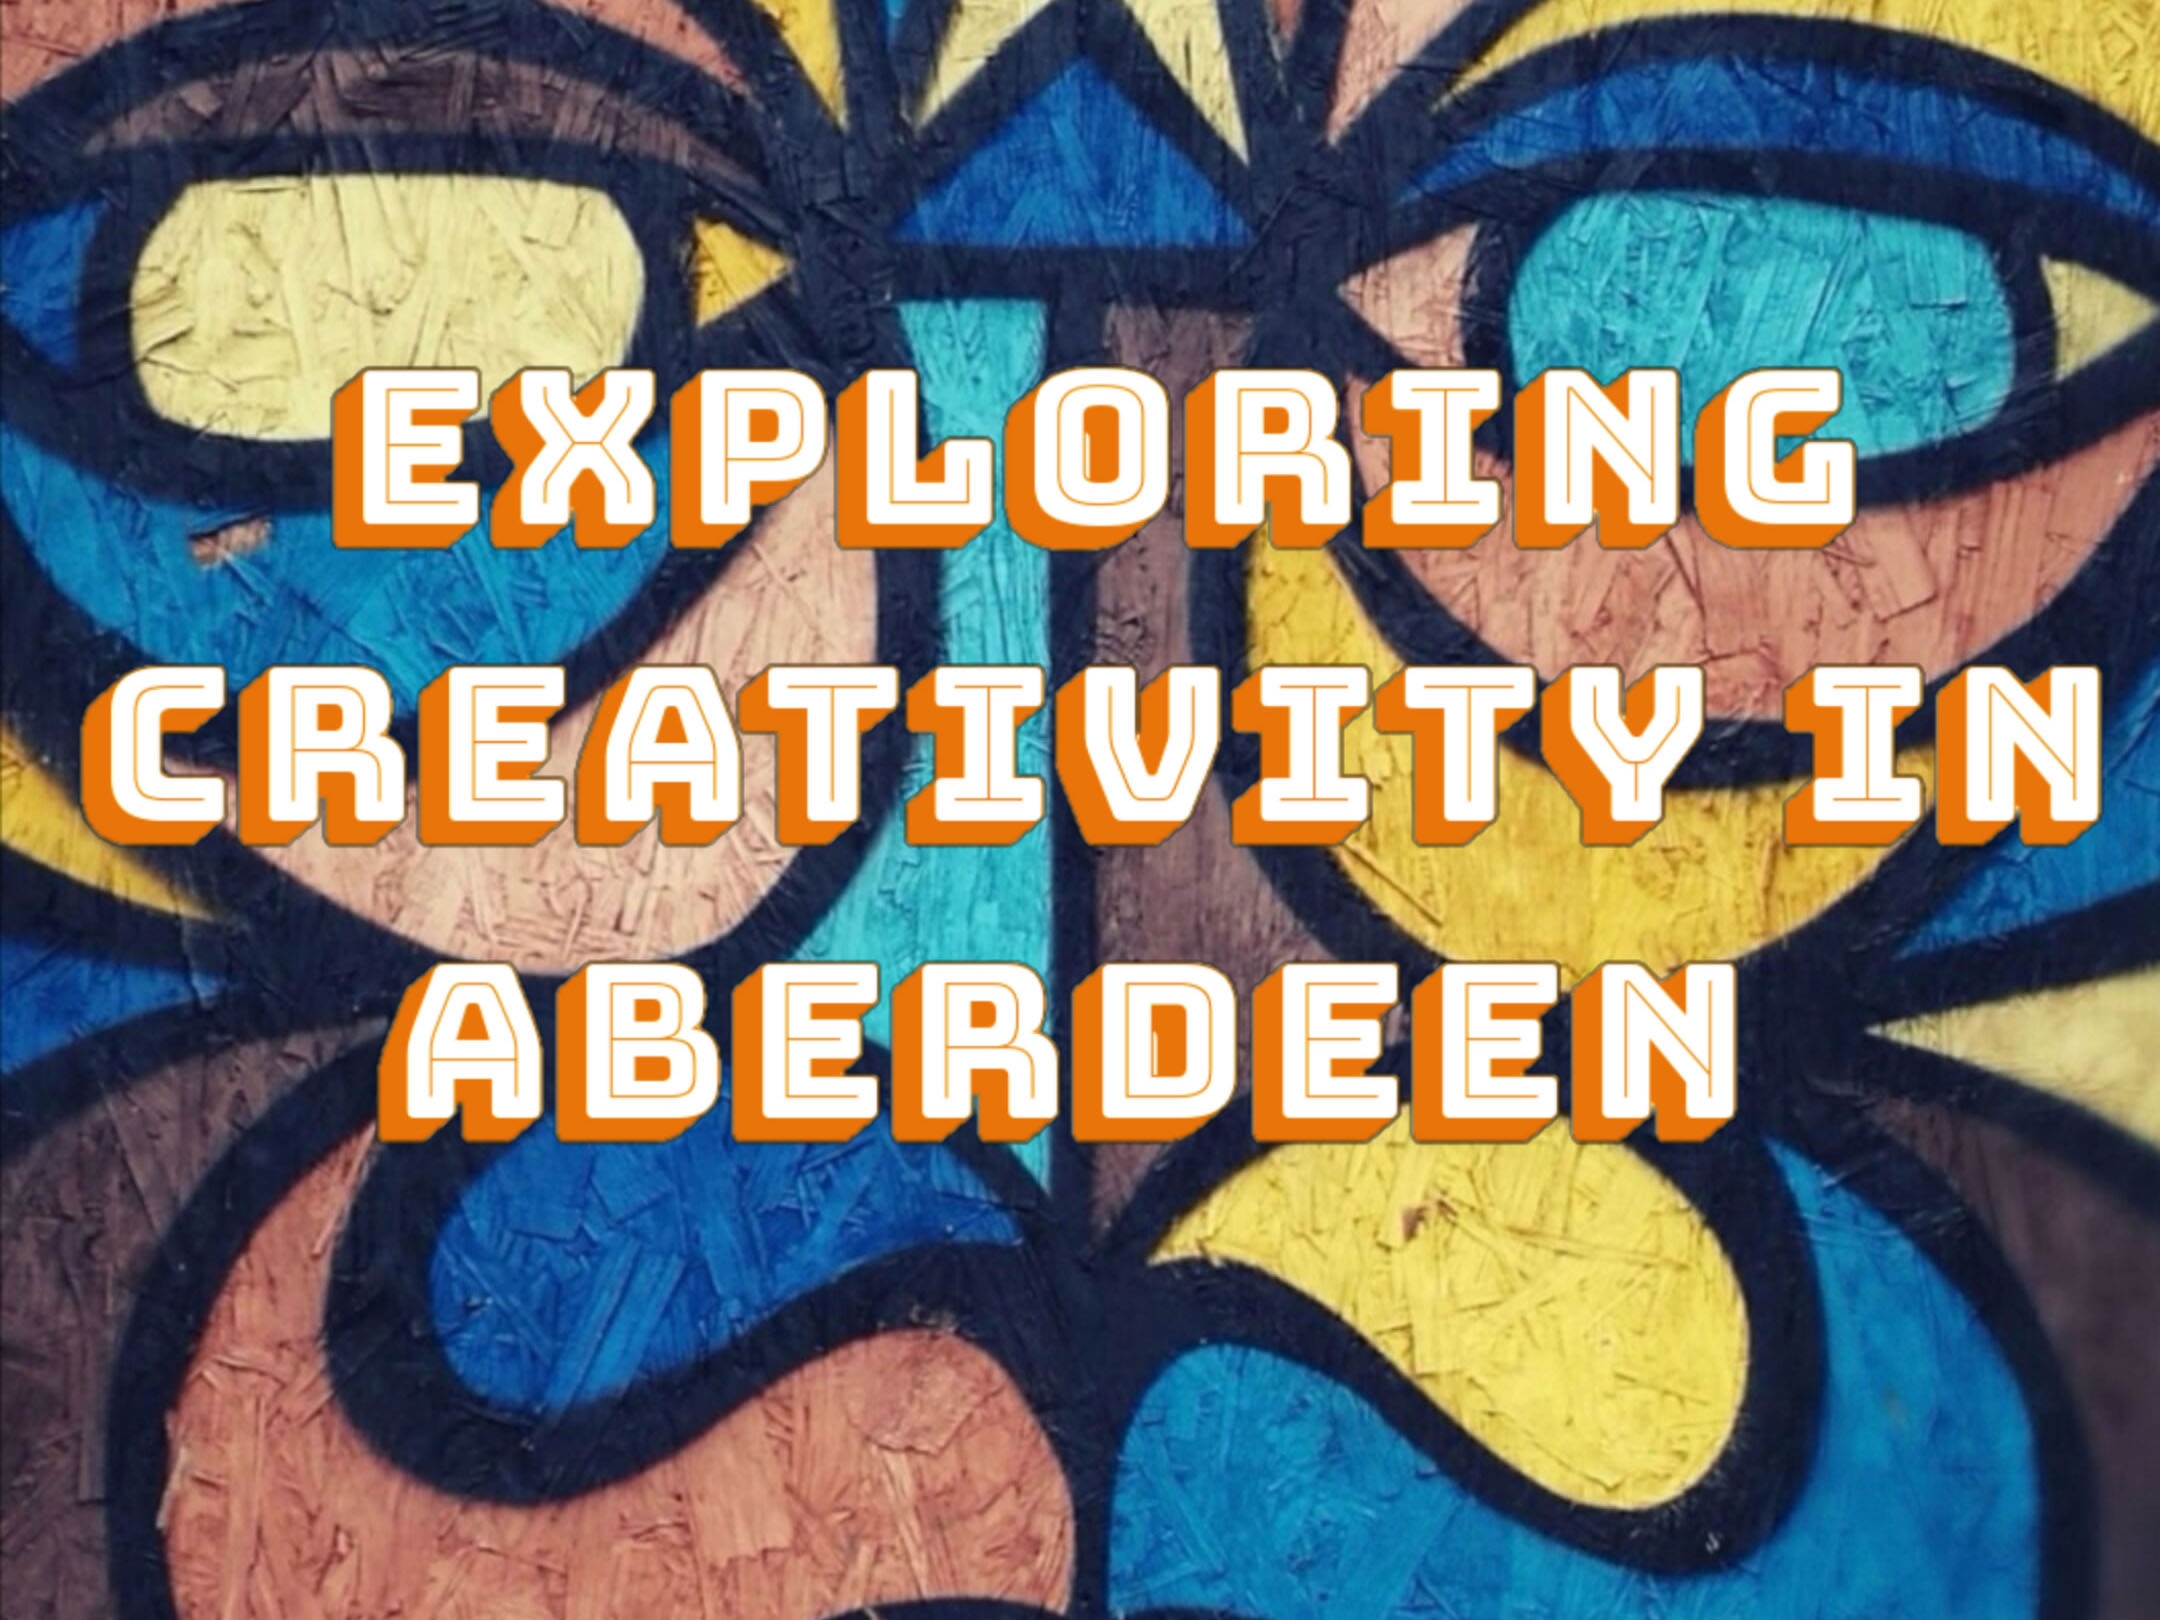 Artwork which reads 'Exploring Creativity'